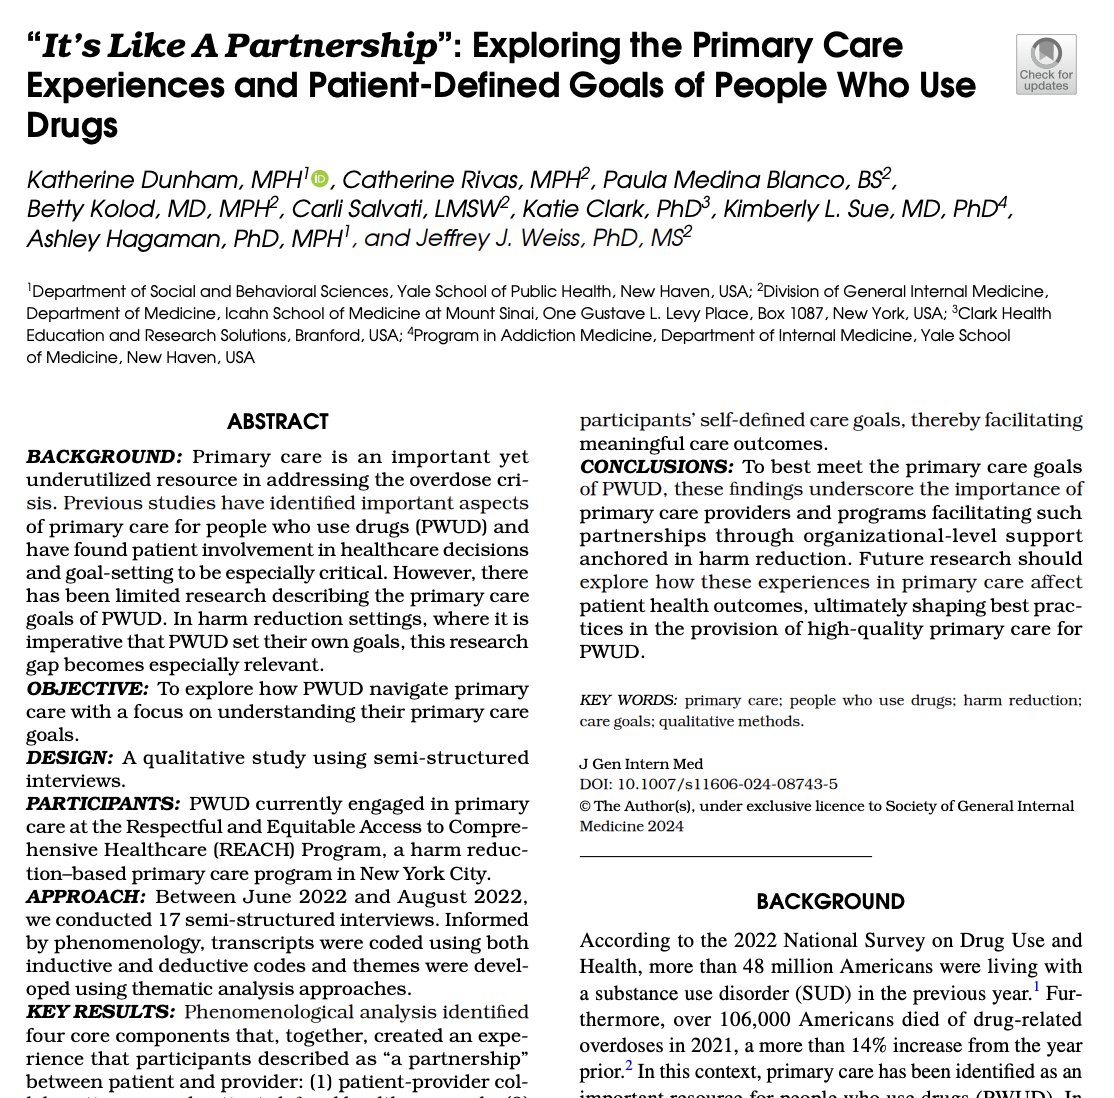 Check out the latest study from CDUHR investigators Betty Kolod and Jeffrey Weiss - “It’s Like A Partnership”: Exploring the Primary Care Experiences and Patient-Defined Goals of People Who Use Drugs rdcu.be/dGy0F